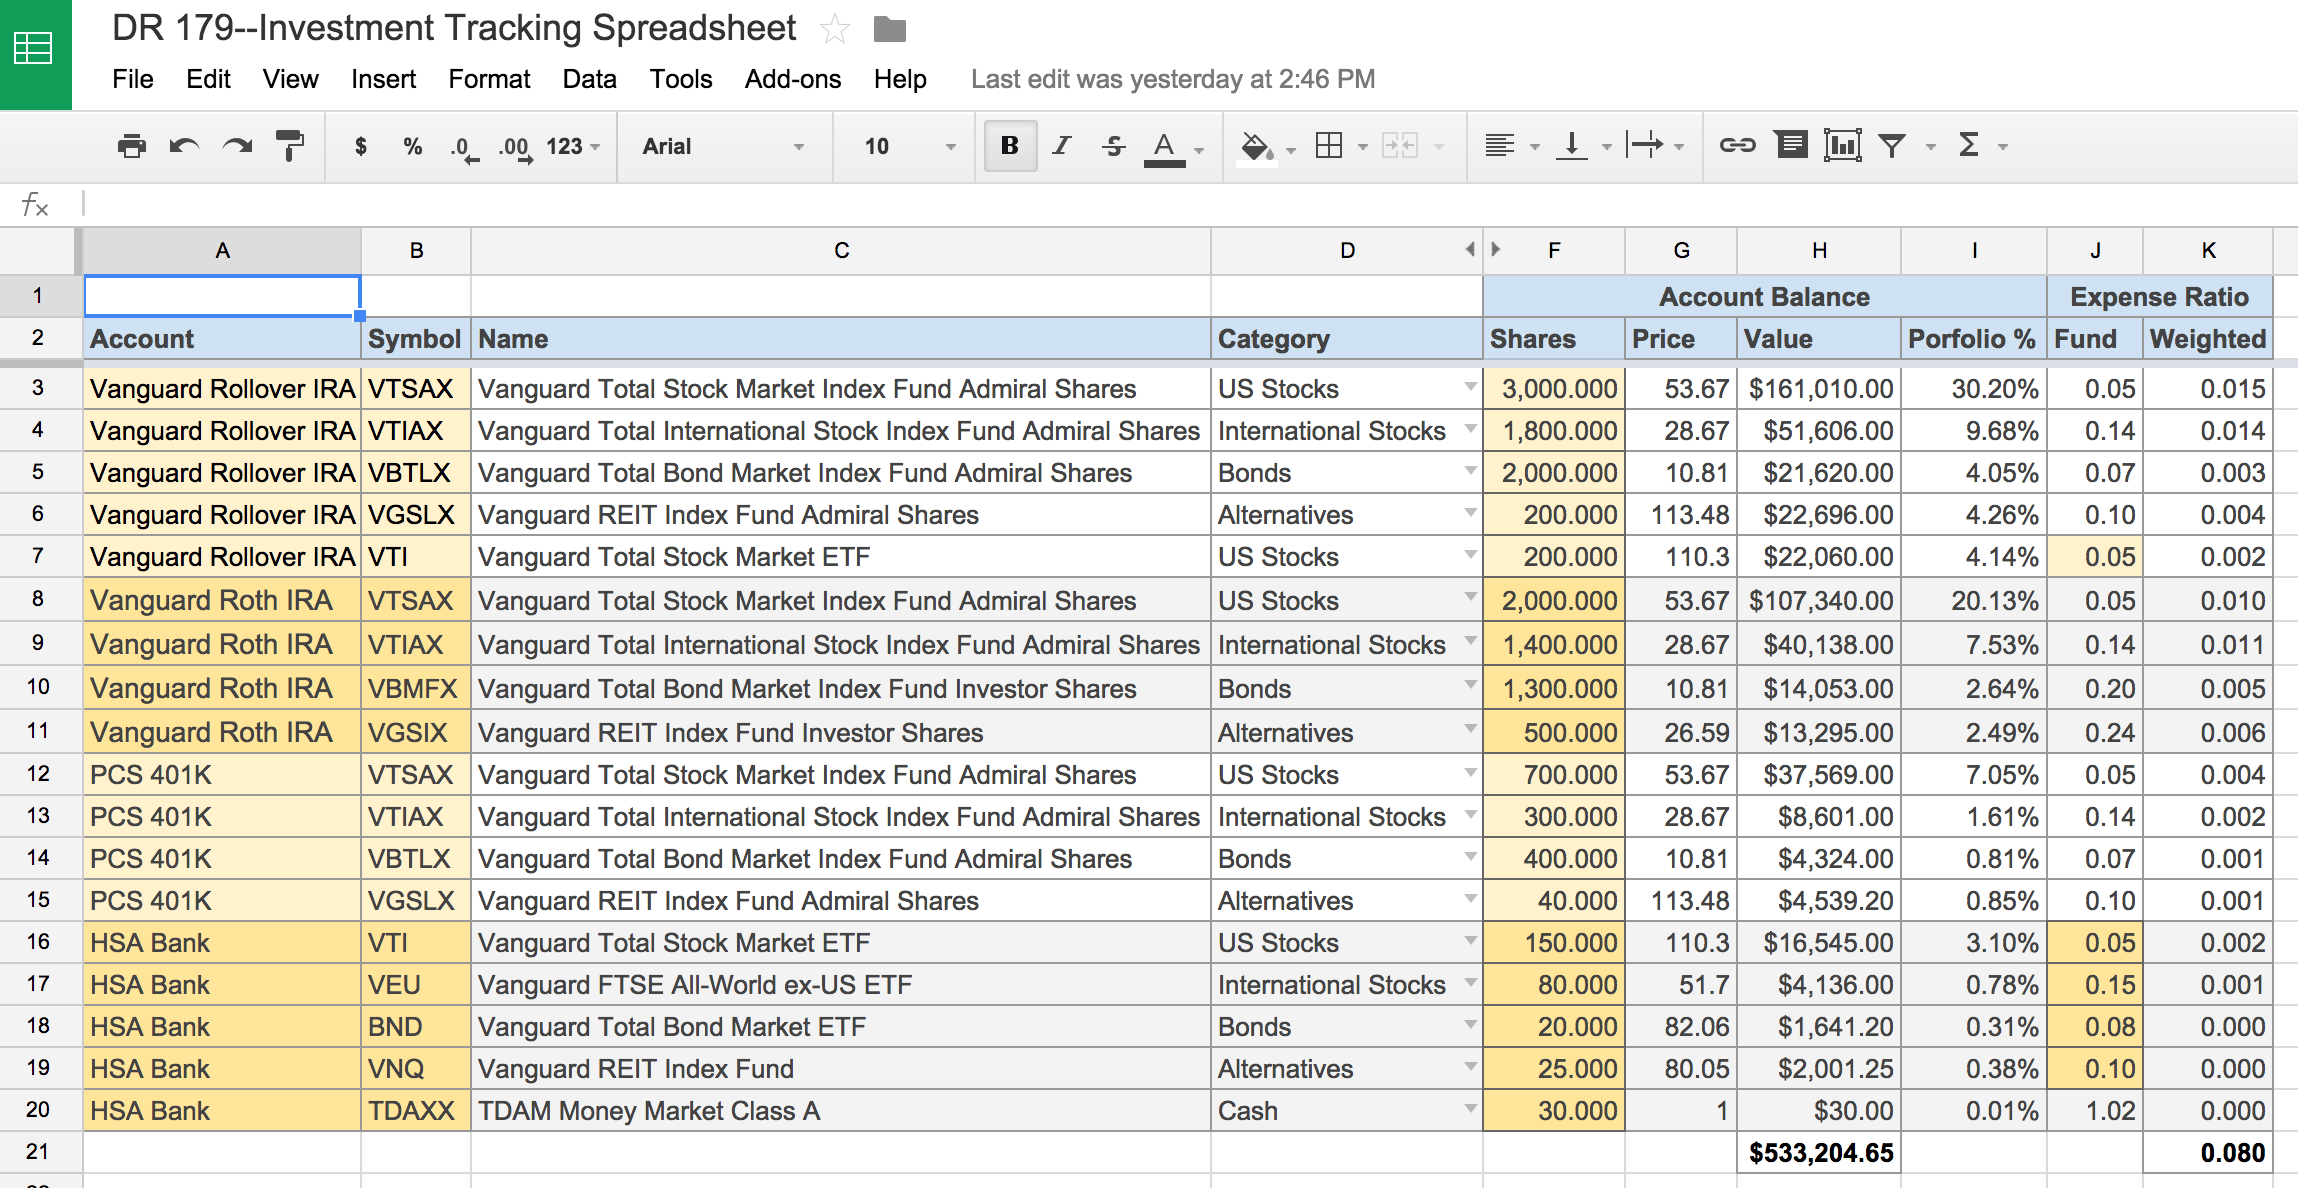 Free Excel Stock Tracking Spreadsheet With An Awesome And Free Investment Tracking Spreadsheet